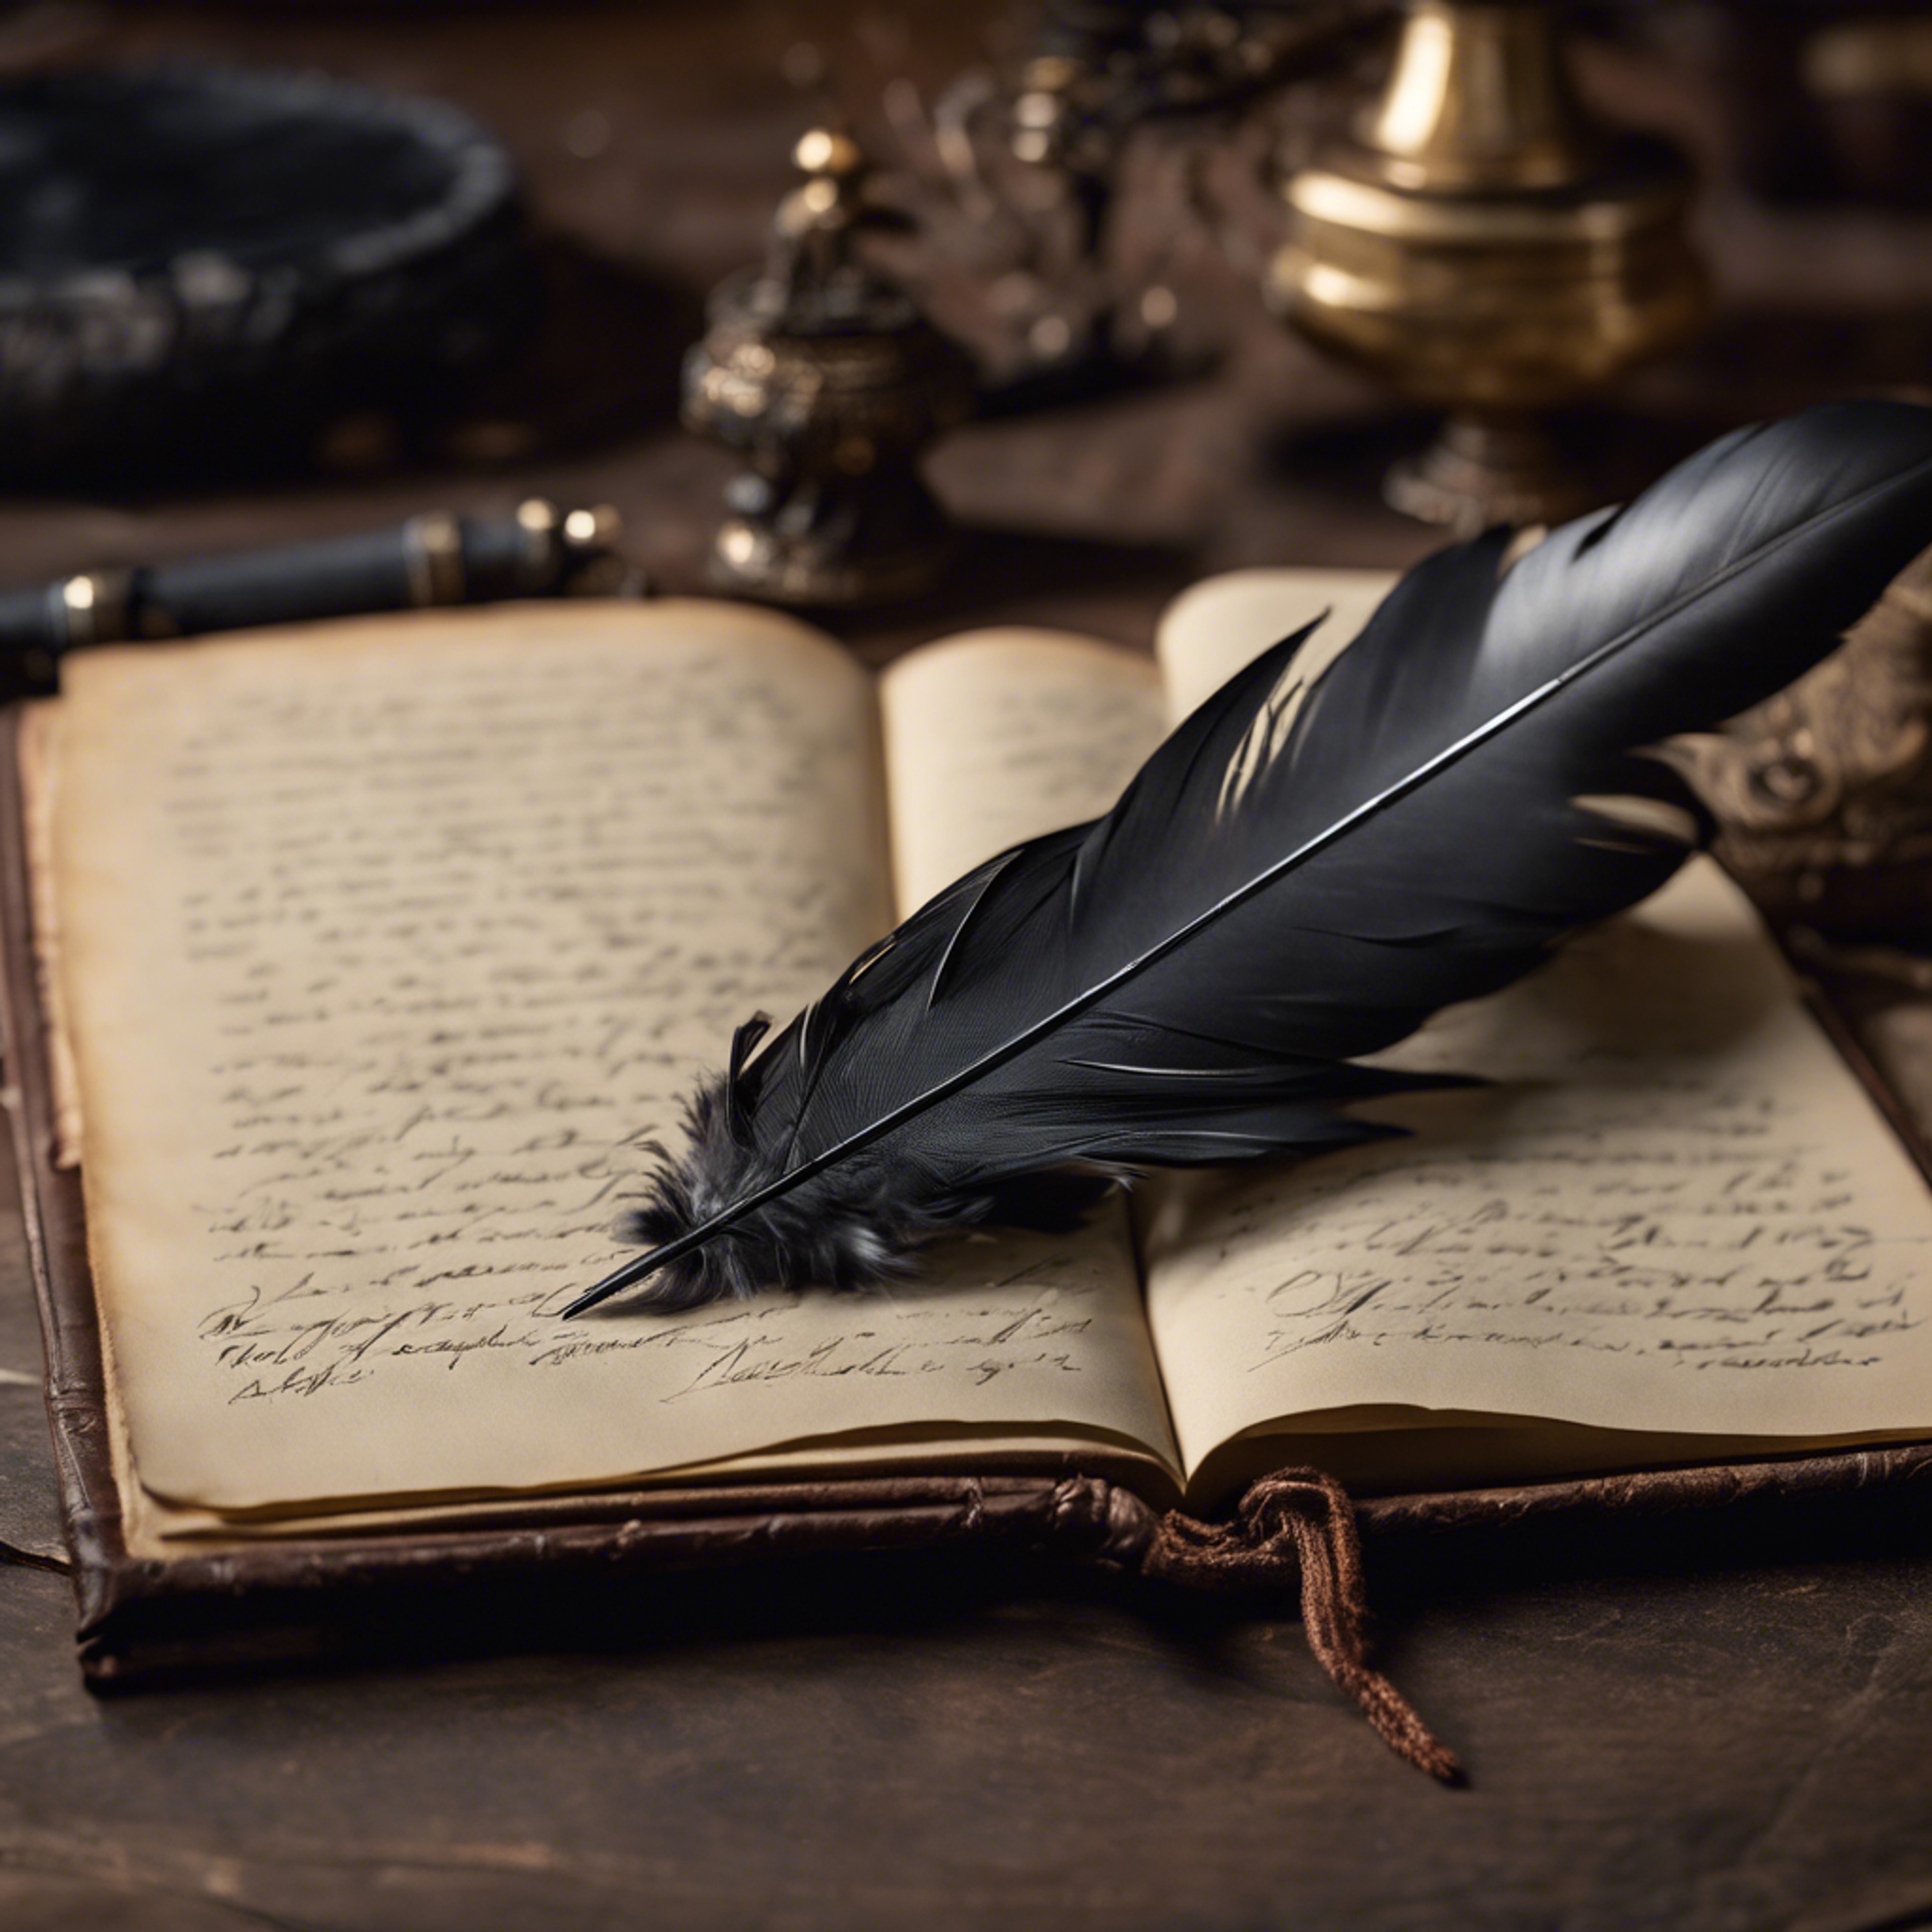 A black feather quill pen poised to write in an antique leather-bound journal. Тапет[1a576fd5c1f949af9941]